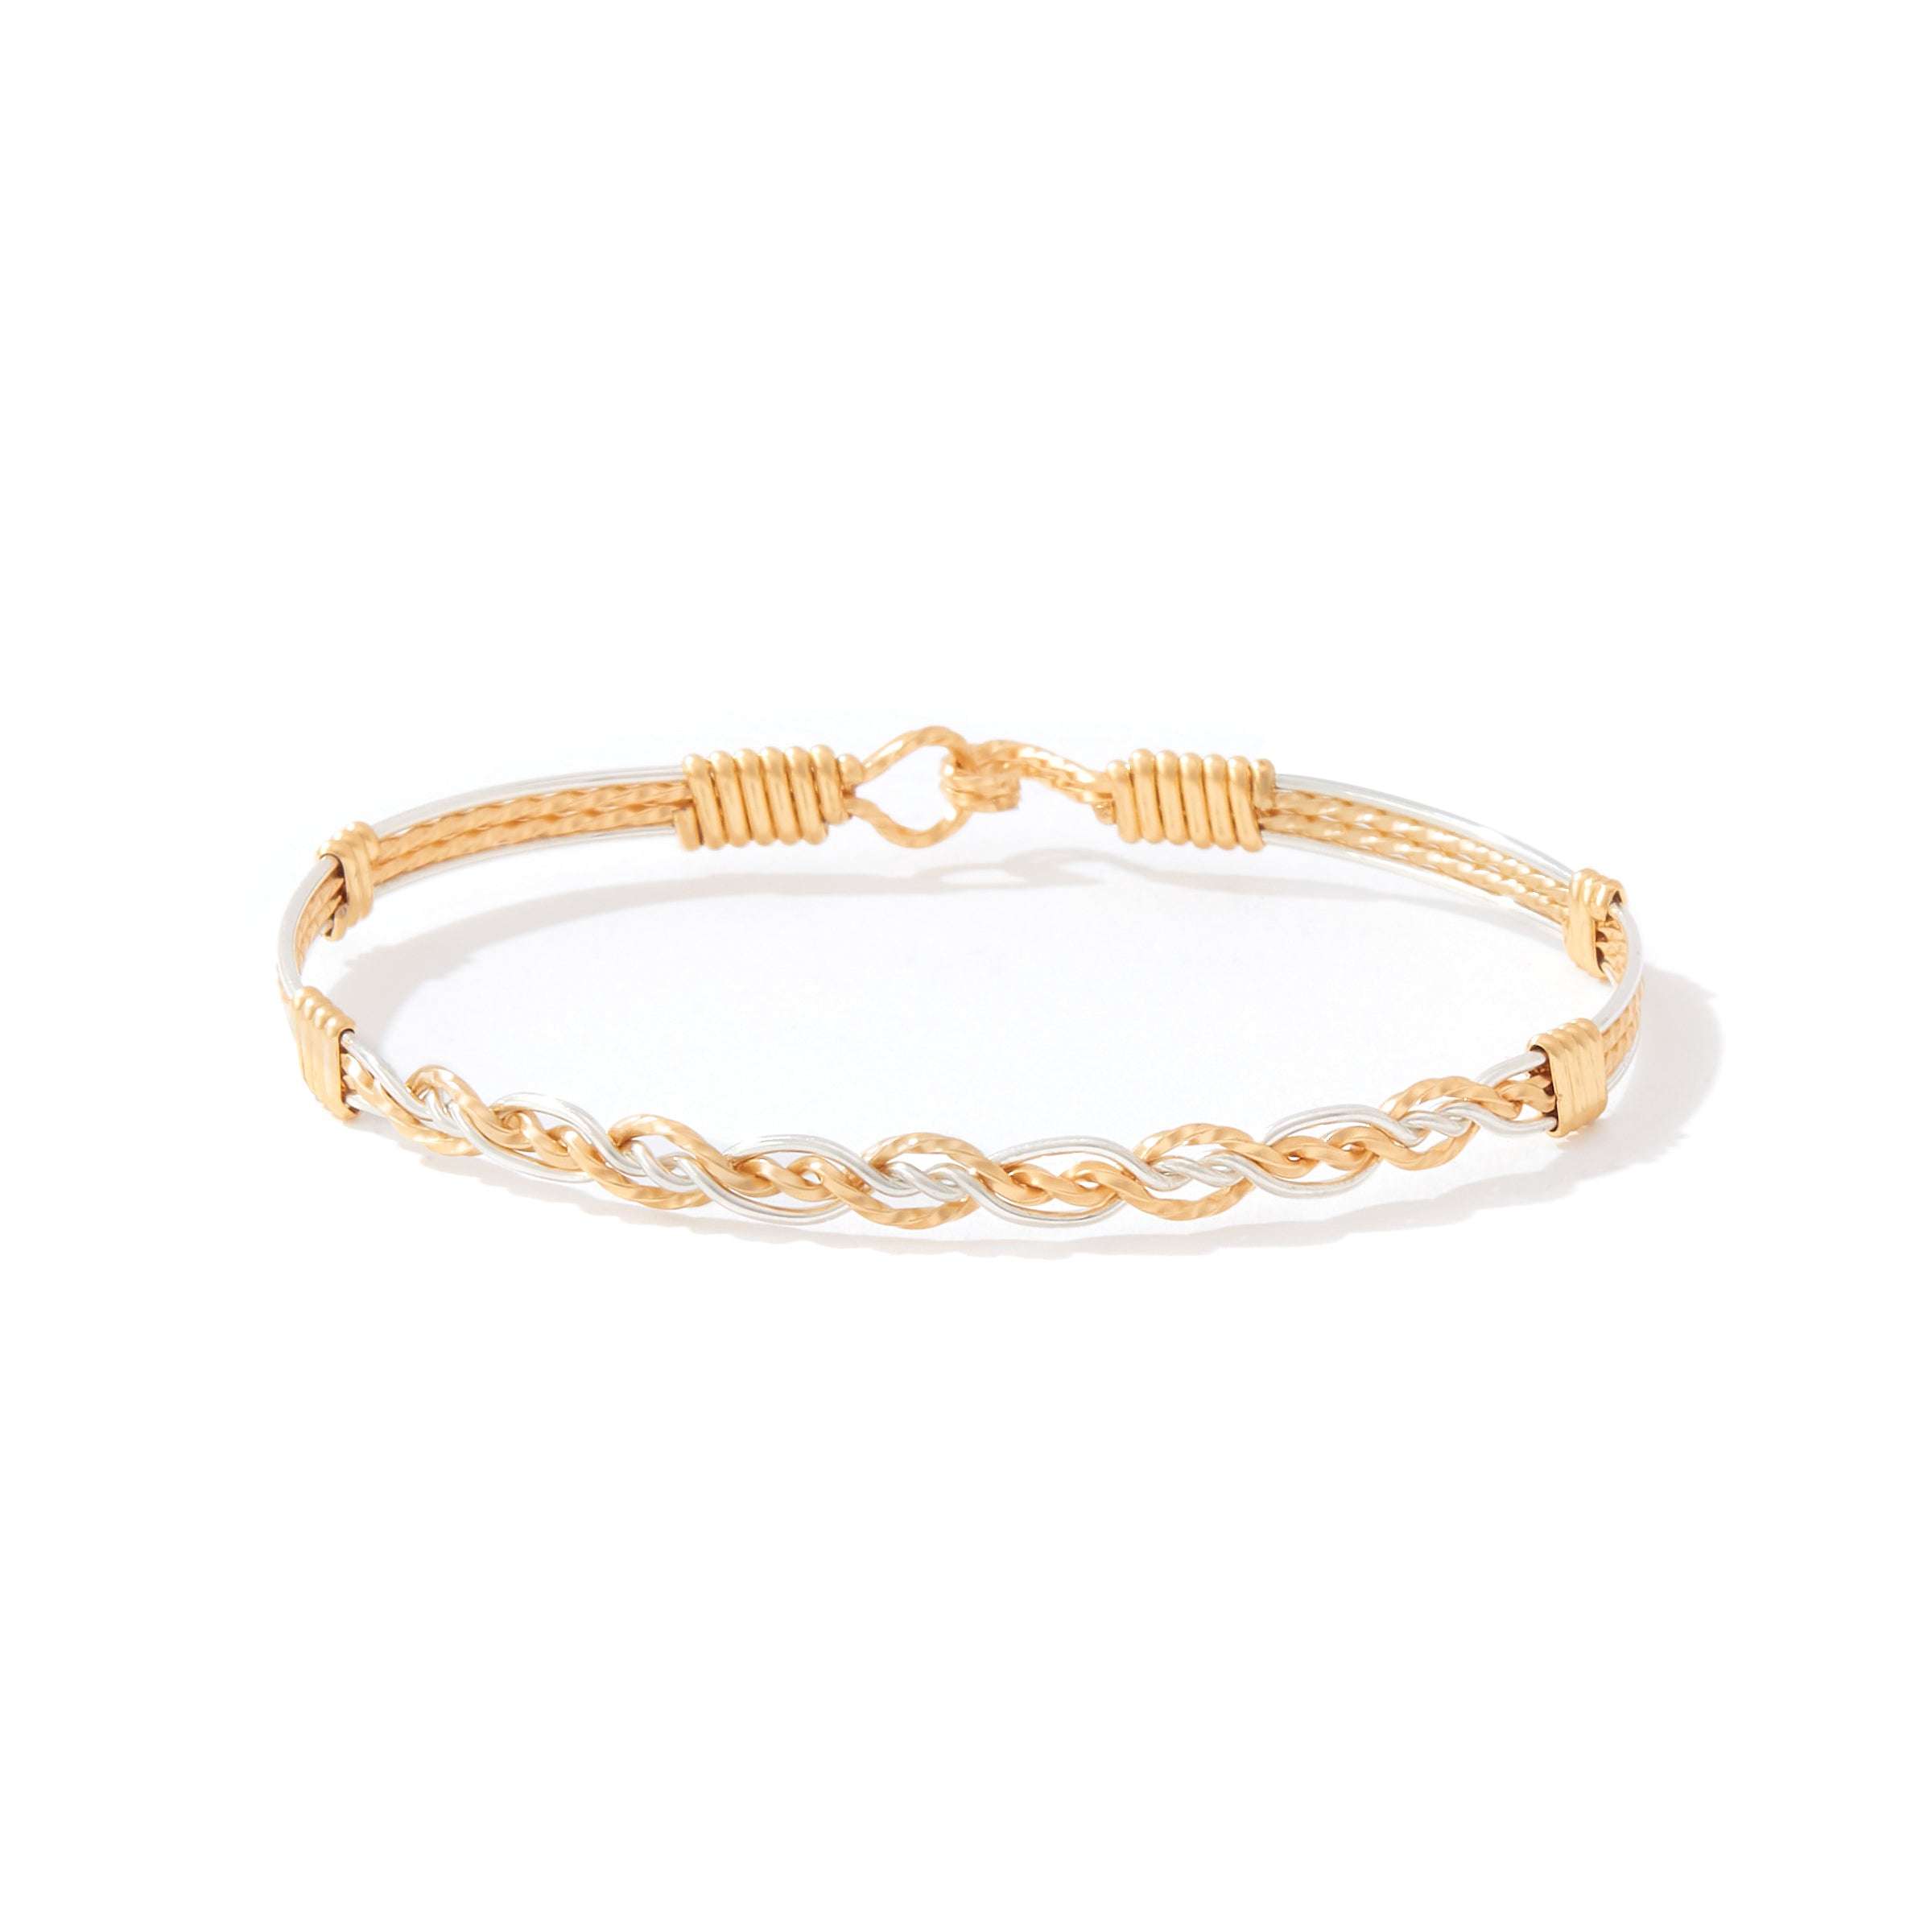 Ronaldo Bracelet Unconditional 14K Gold and Sterling Silver